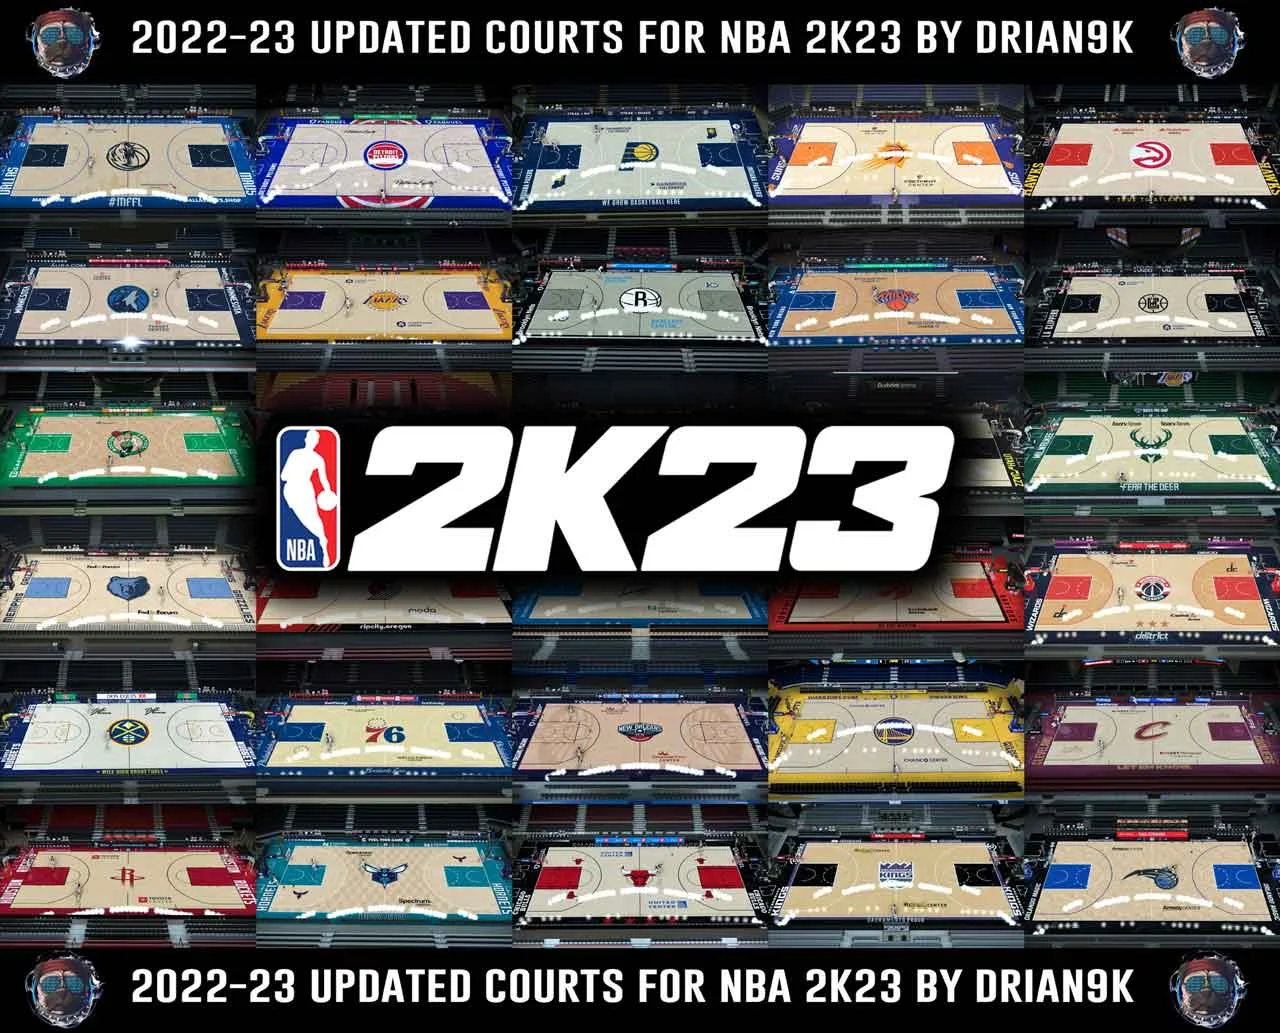 NBA 2K23 Updated 2022-2023 Courts (All 30 NBA Teams)